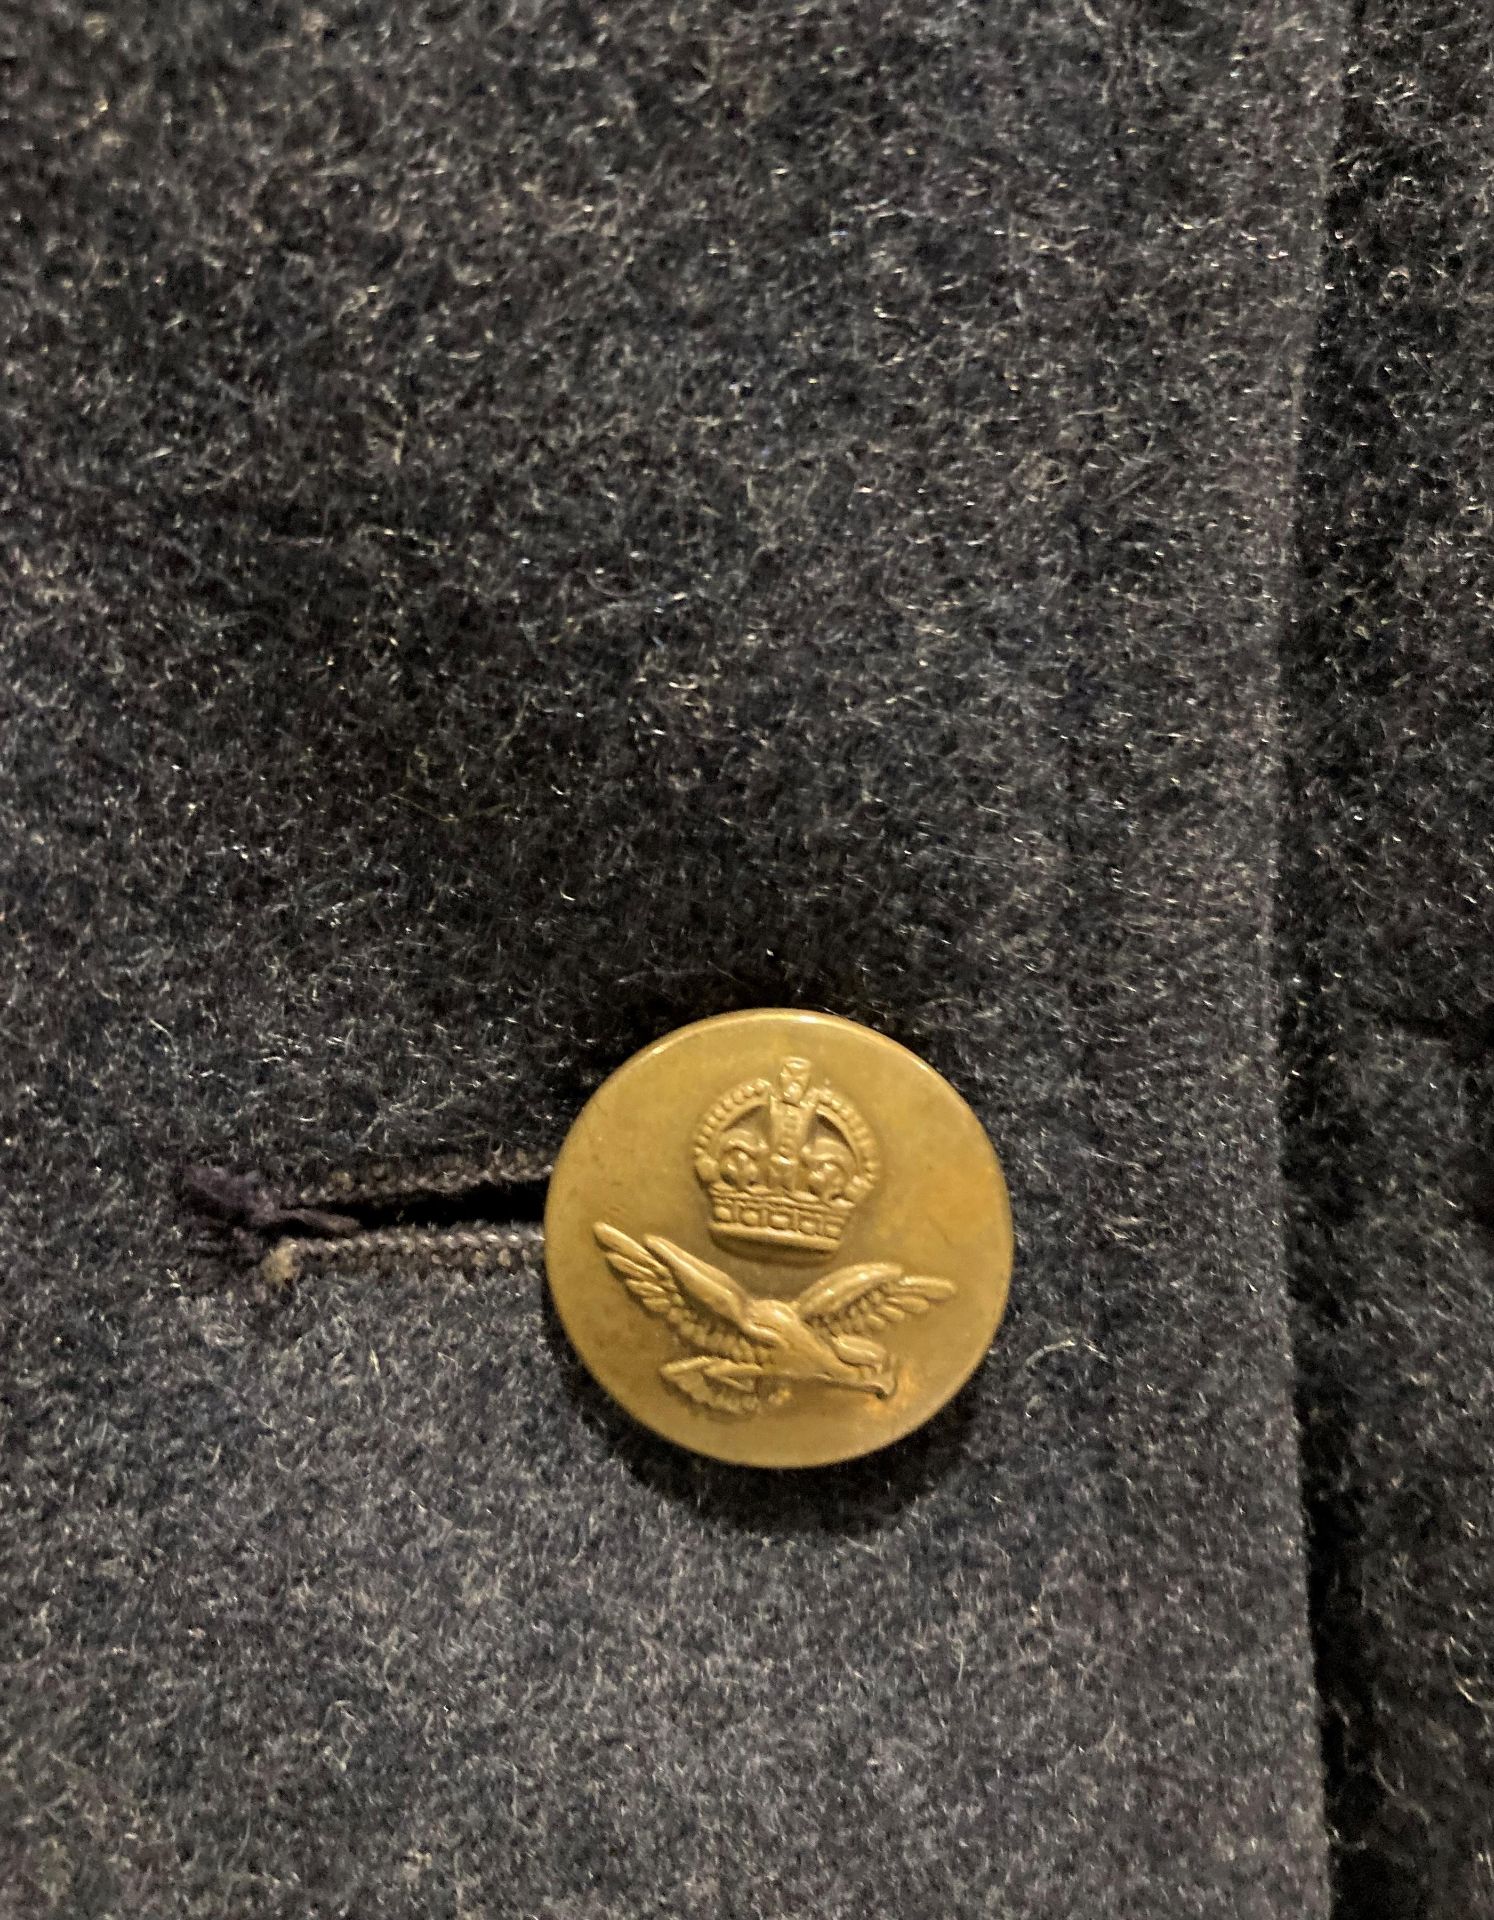 Genuine RAF Airmen overcoat with brass RAF buttons, - Image 3 of 4